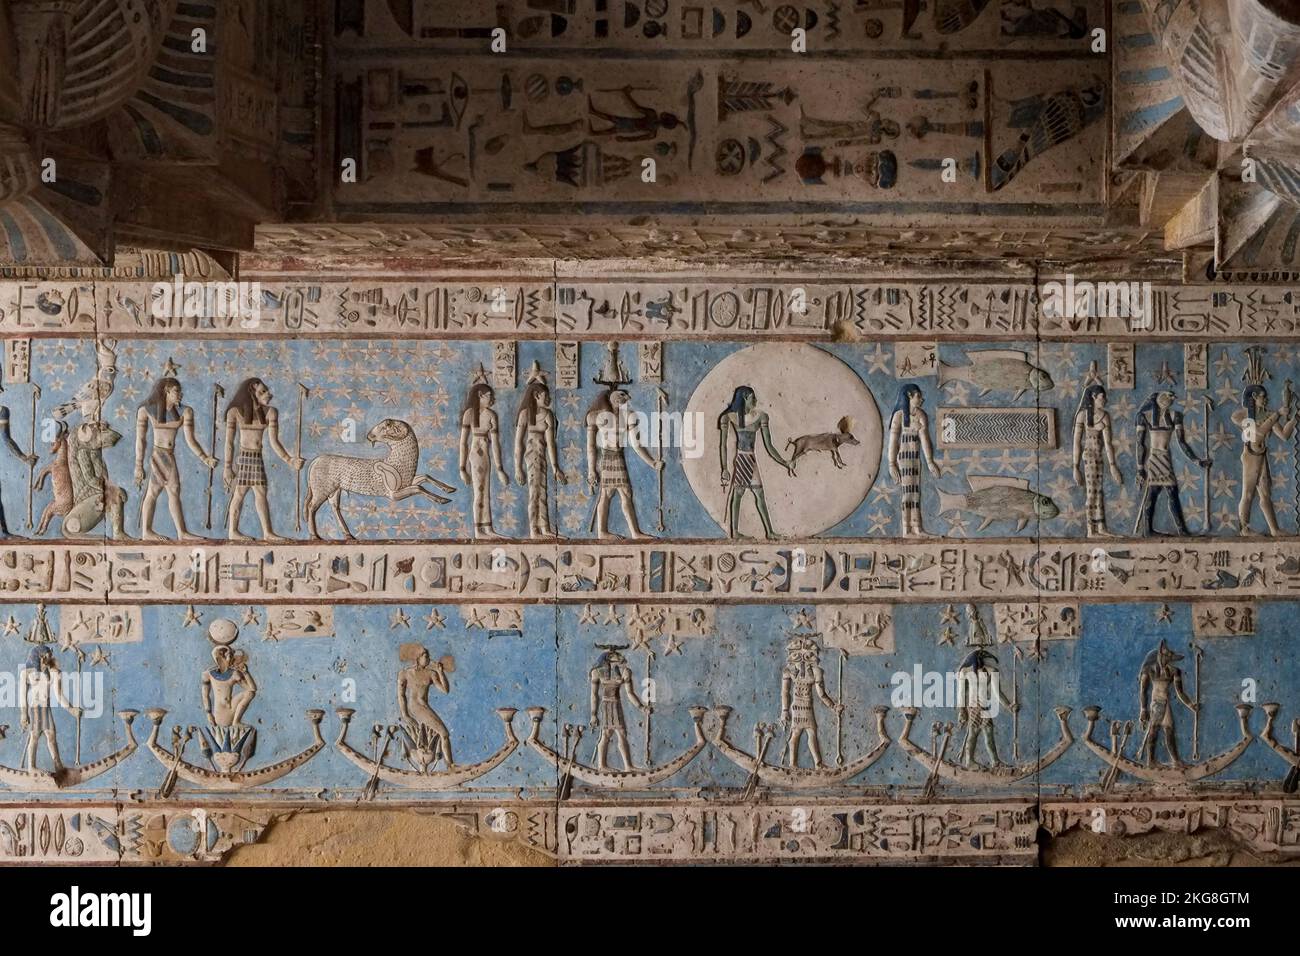 Egypt, Esna, Hieroglyphics carved into ceiling at Temple of Dendarah Stock Photo